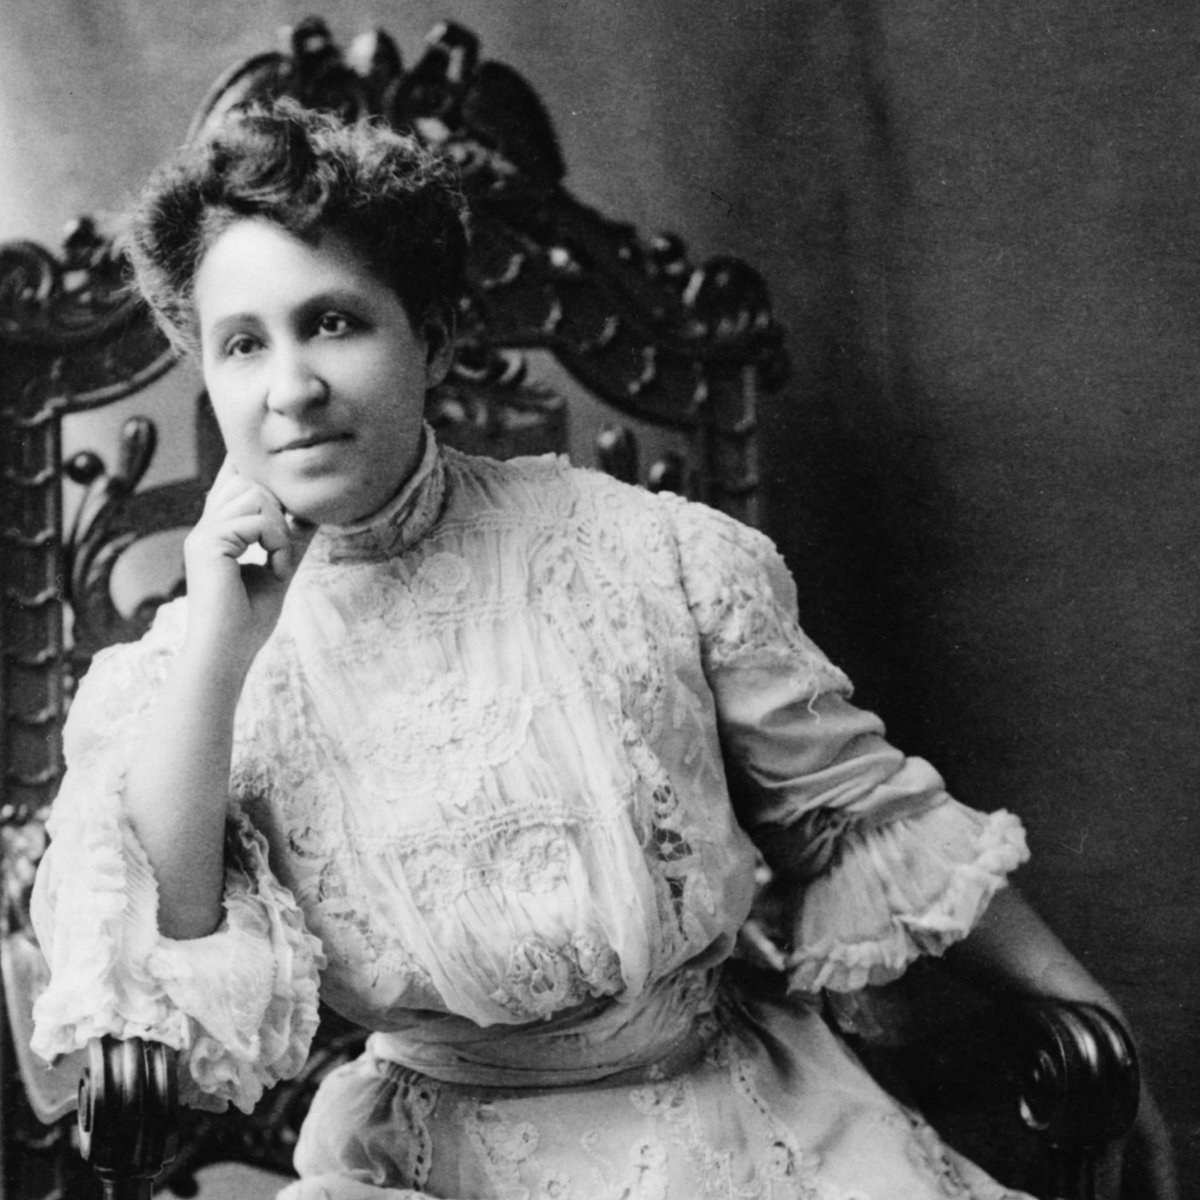 On this day in 1863, Mary Church Terrell was born. She used her wealth and status to become an influential civil rights activist, educator, and suffragette. Mary is our #mixedmonday idol! #mixedhistory #mixed #history #marychurchterrell #mixedrace #blackhistory